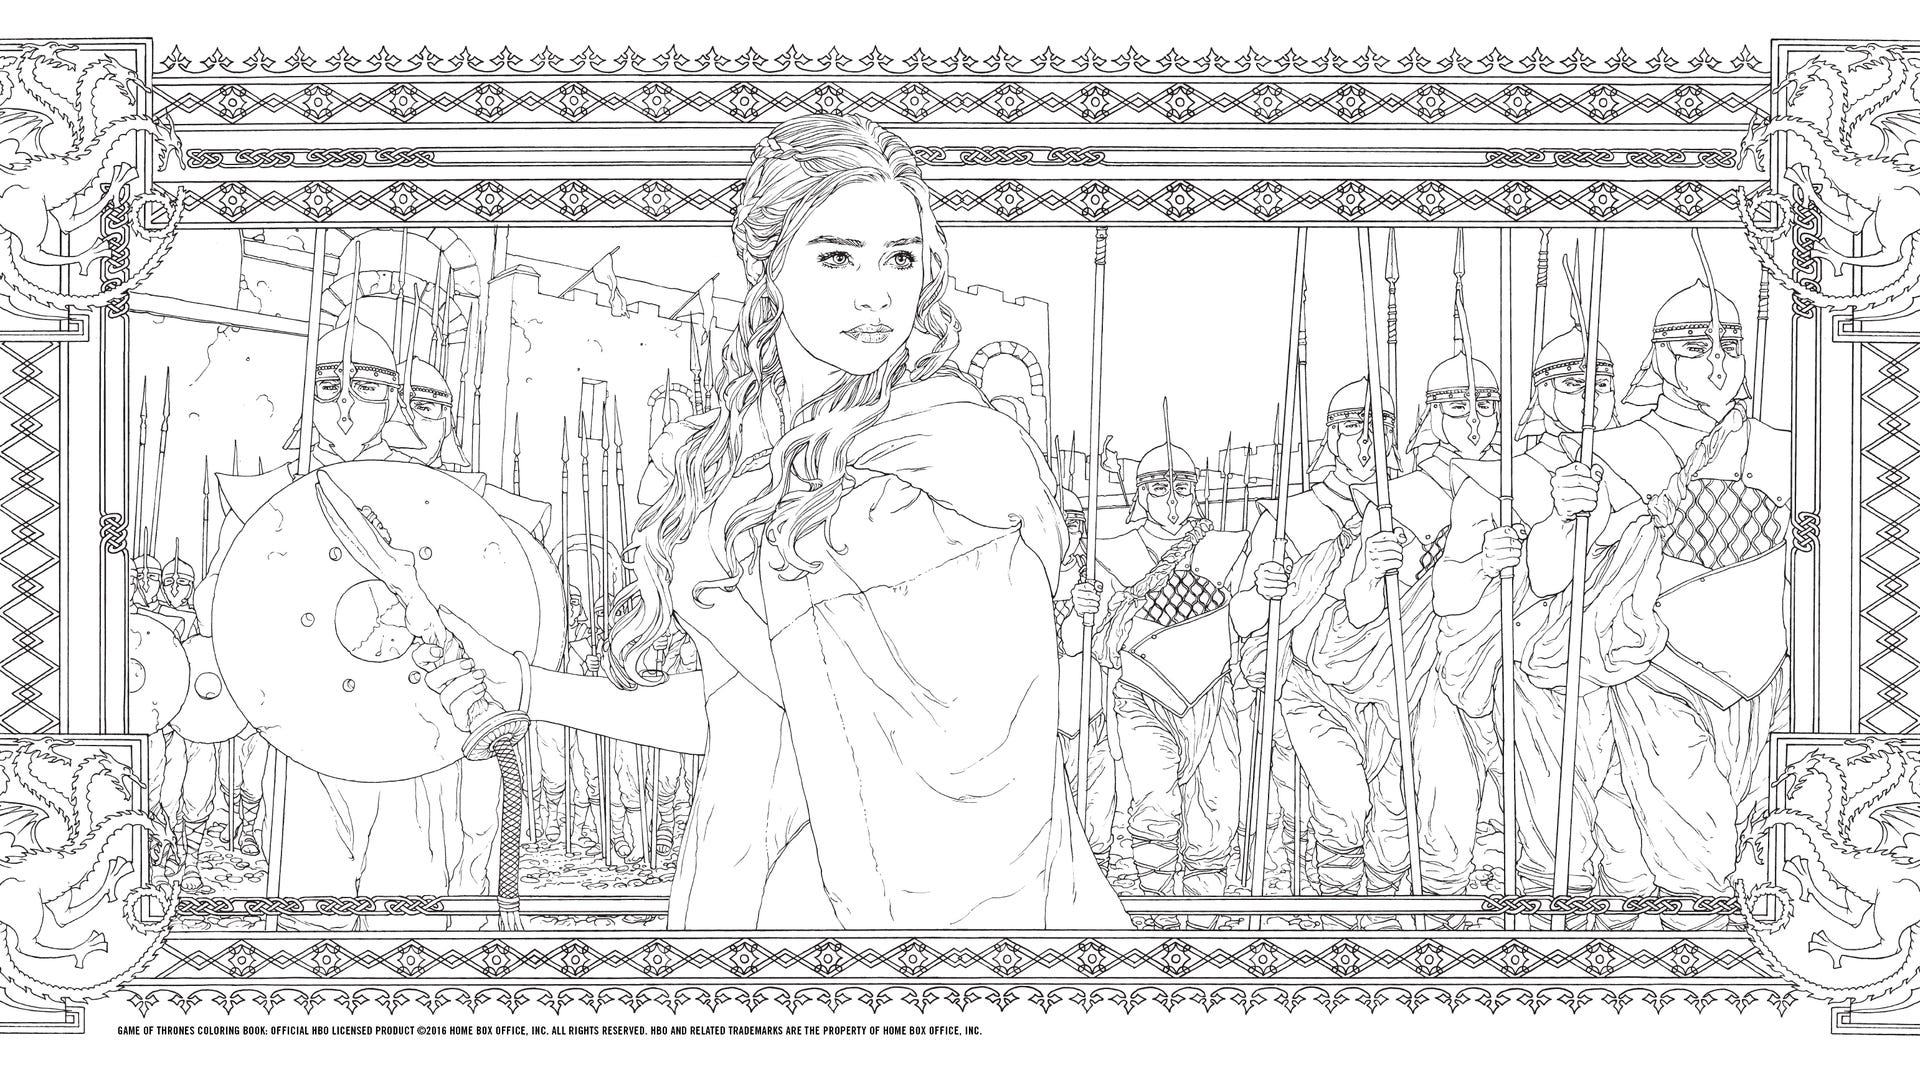 HBO's Game of Thrones Coloring Book: Daenerys and the Army of the Unsullied